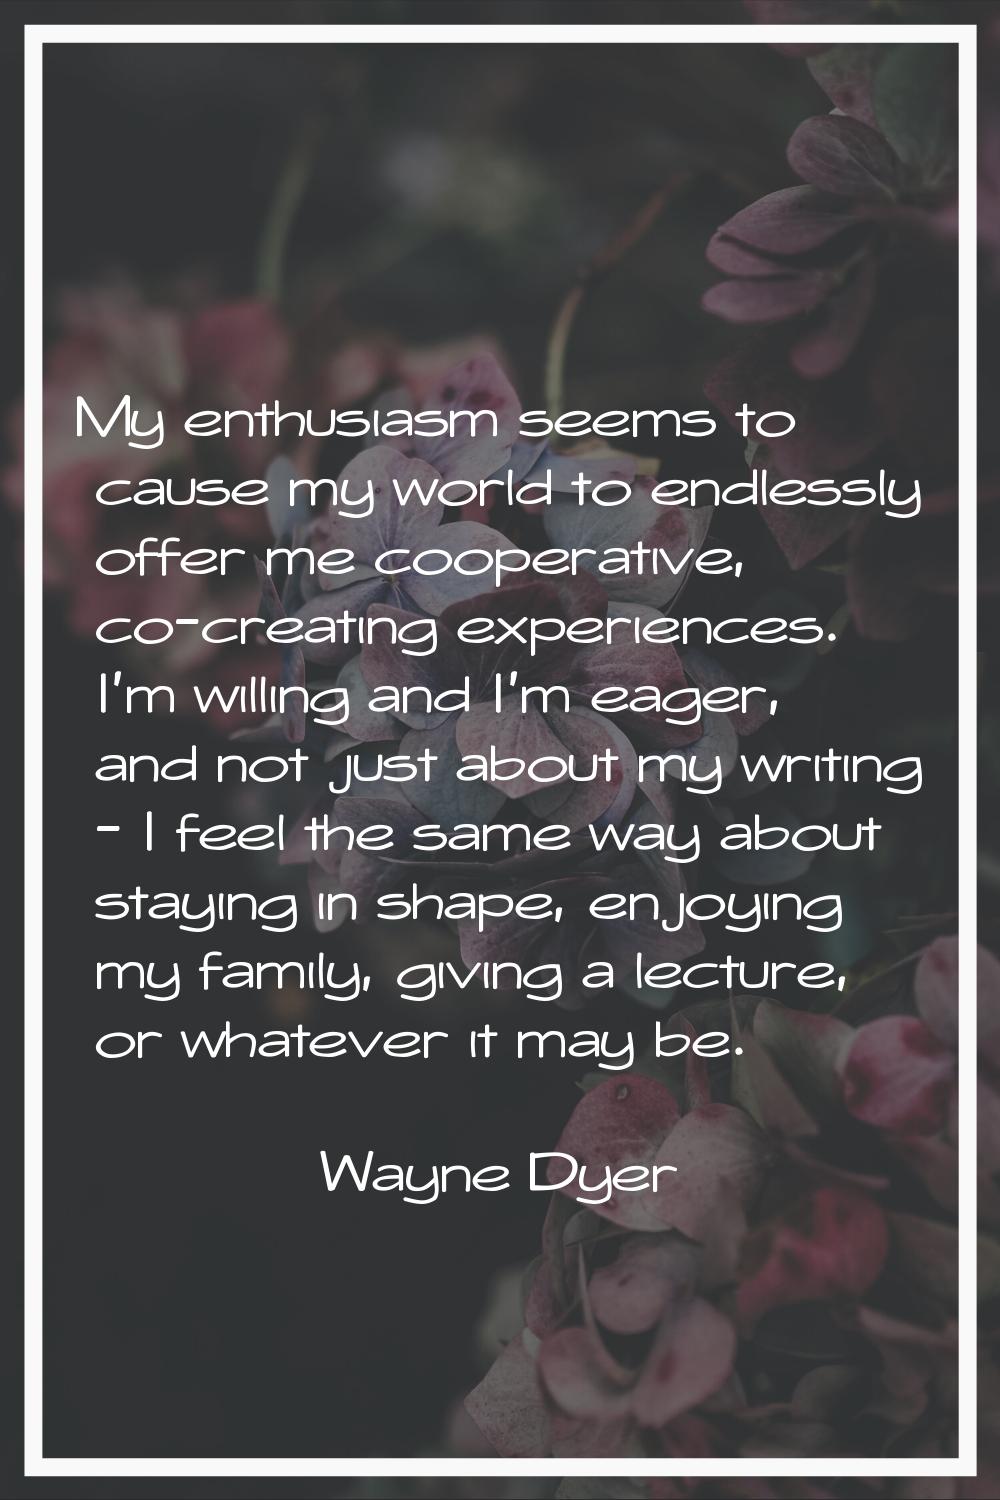 My enthusiasm seems to cause my world to endlessly offer me cooperative, co-creating experiences. I